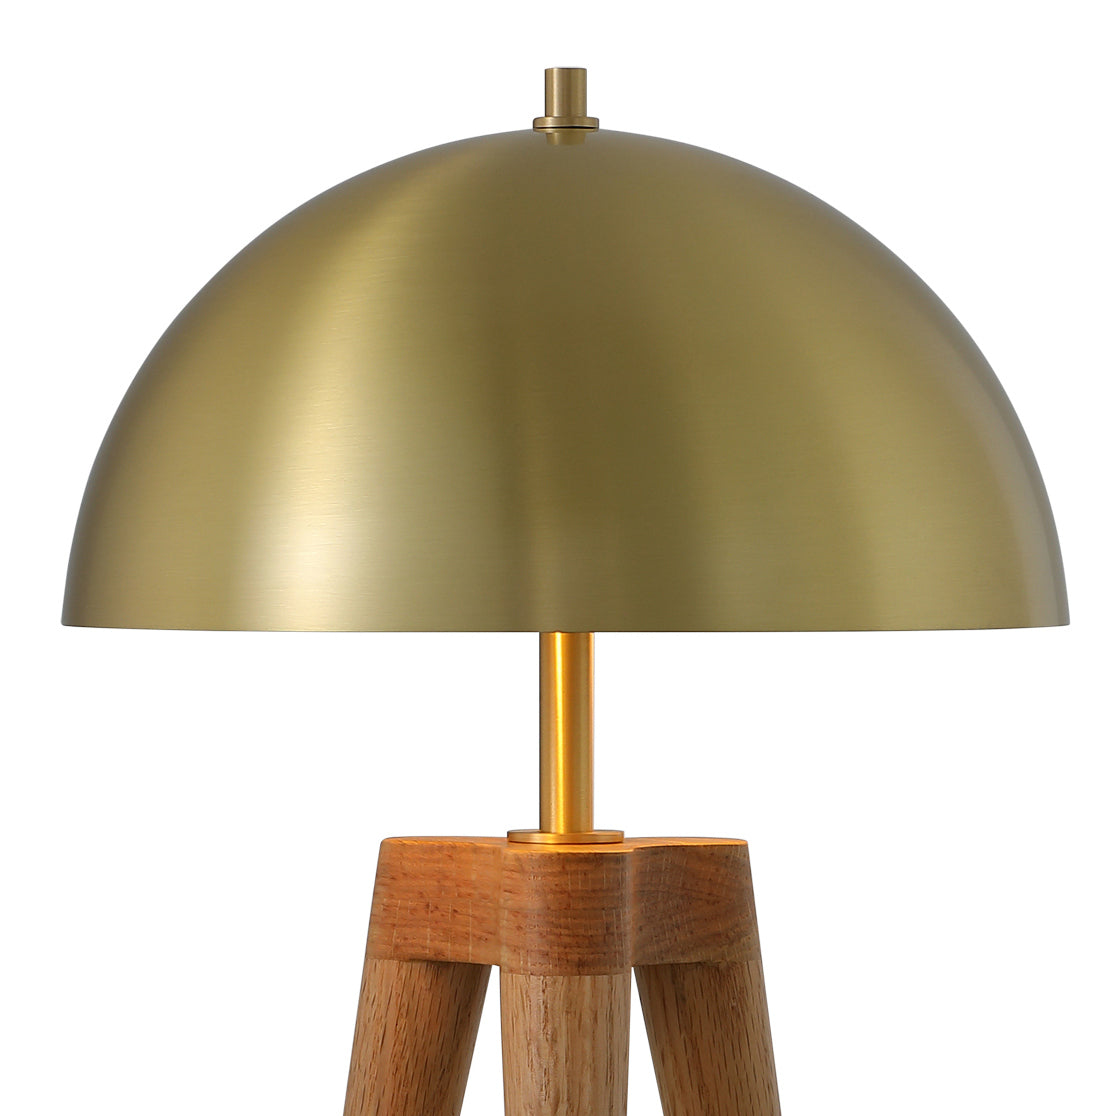 France & Son, Brass Dome Table Lamp with Wooden Tripod Base